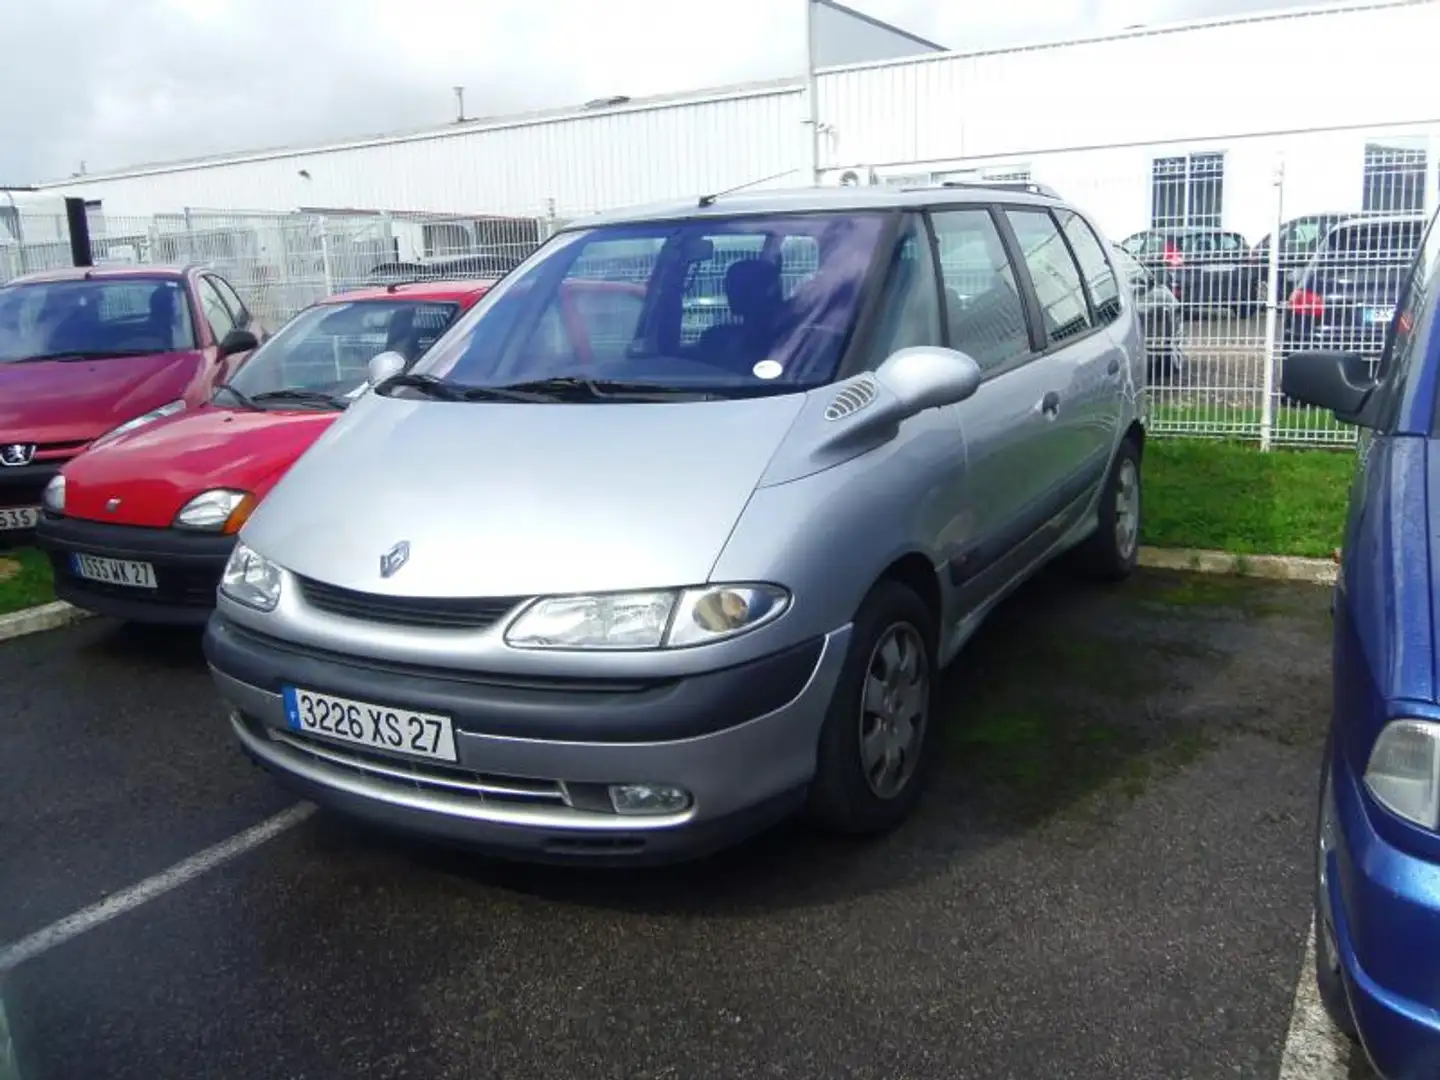 Renault Espace 2.2 dci - expression - 1